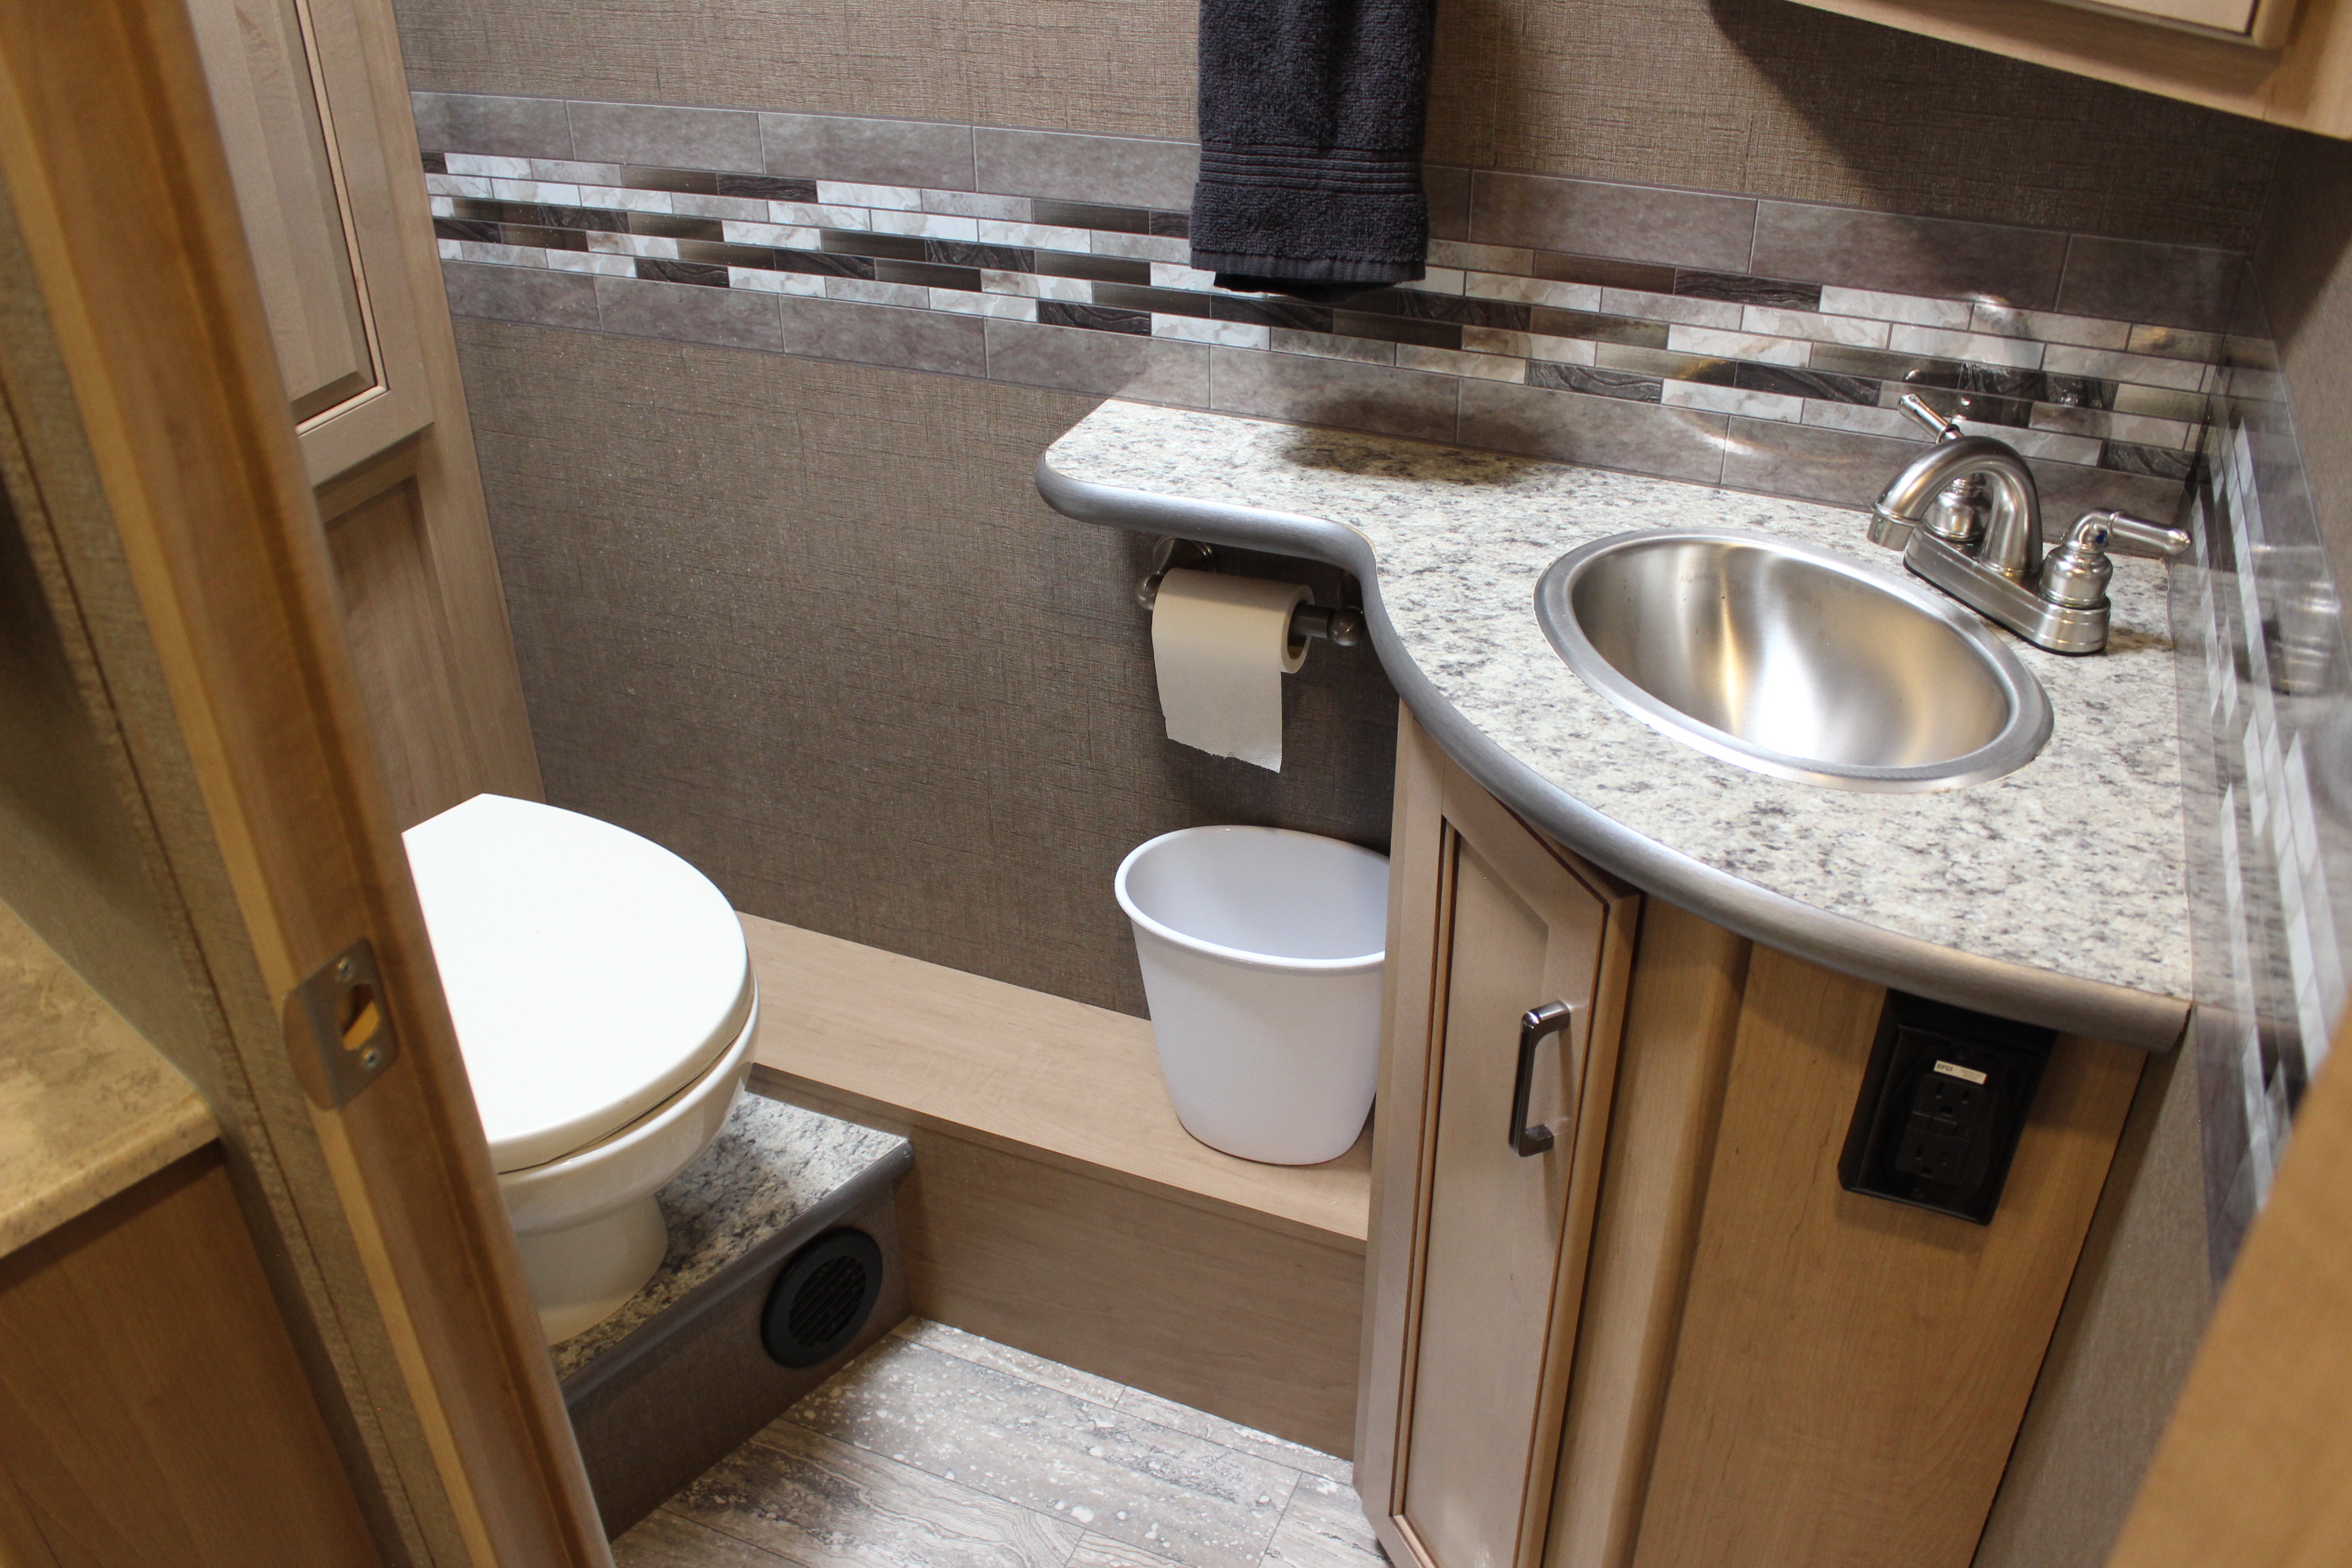 A half bathroom in an RV with toilet and sink